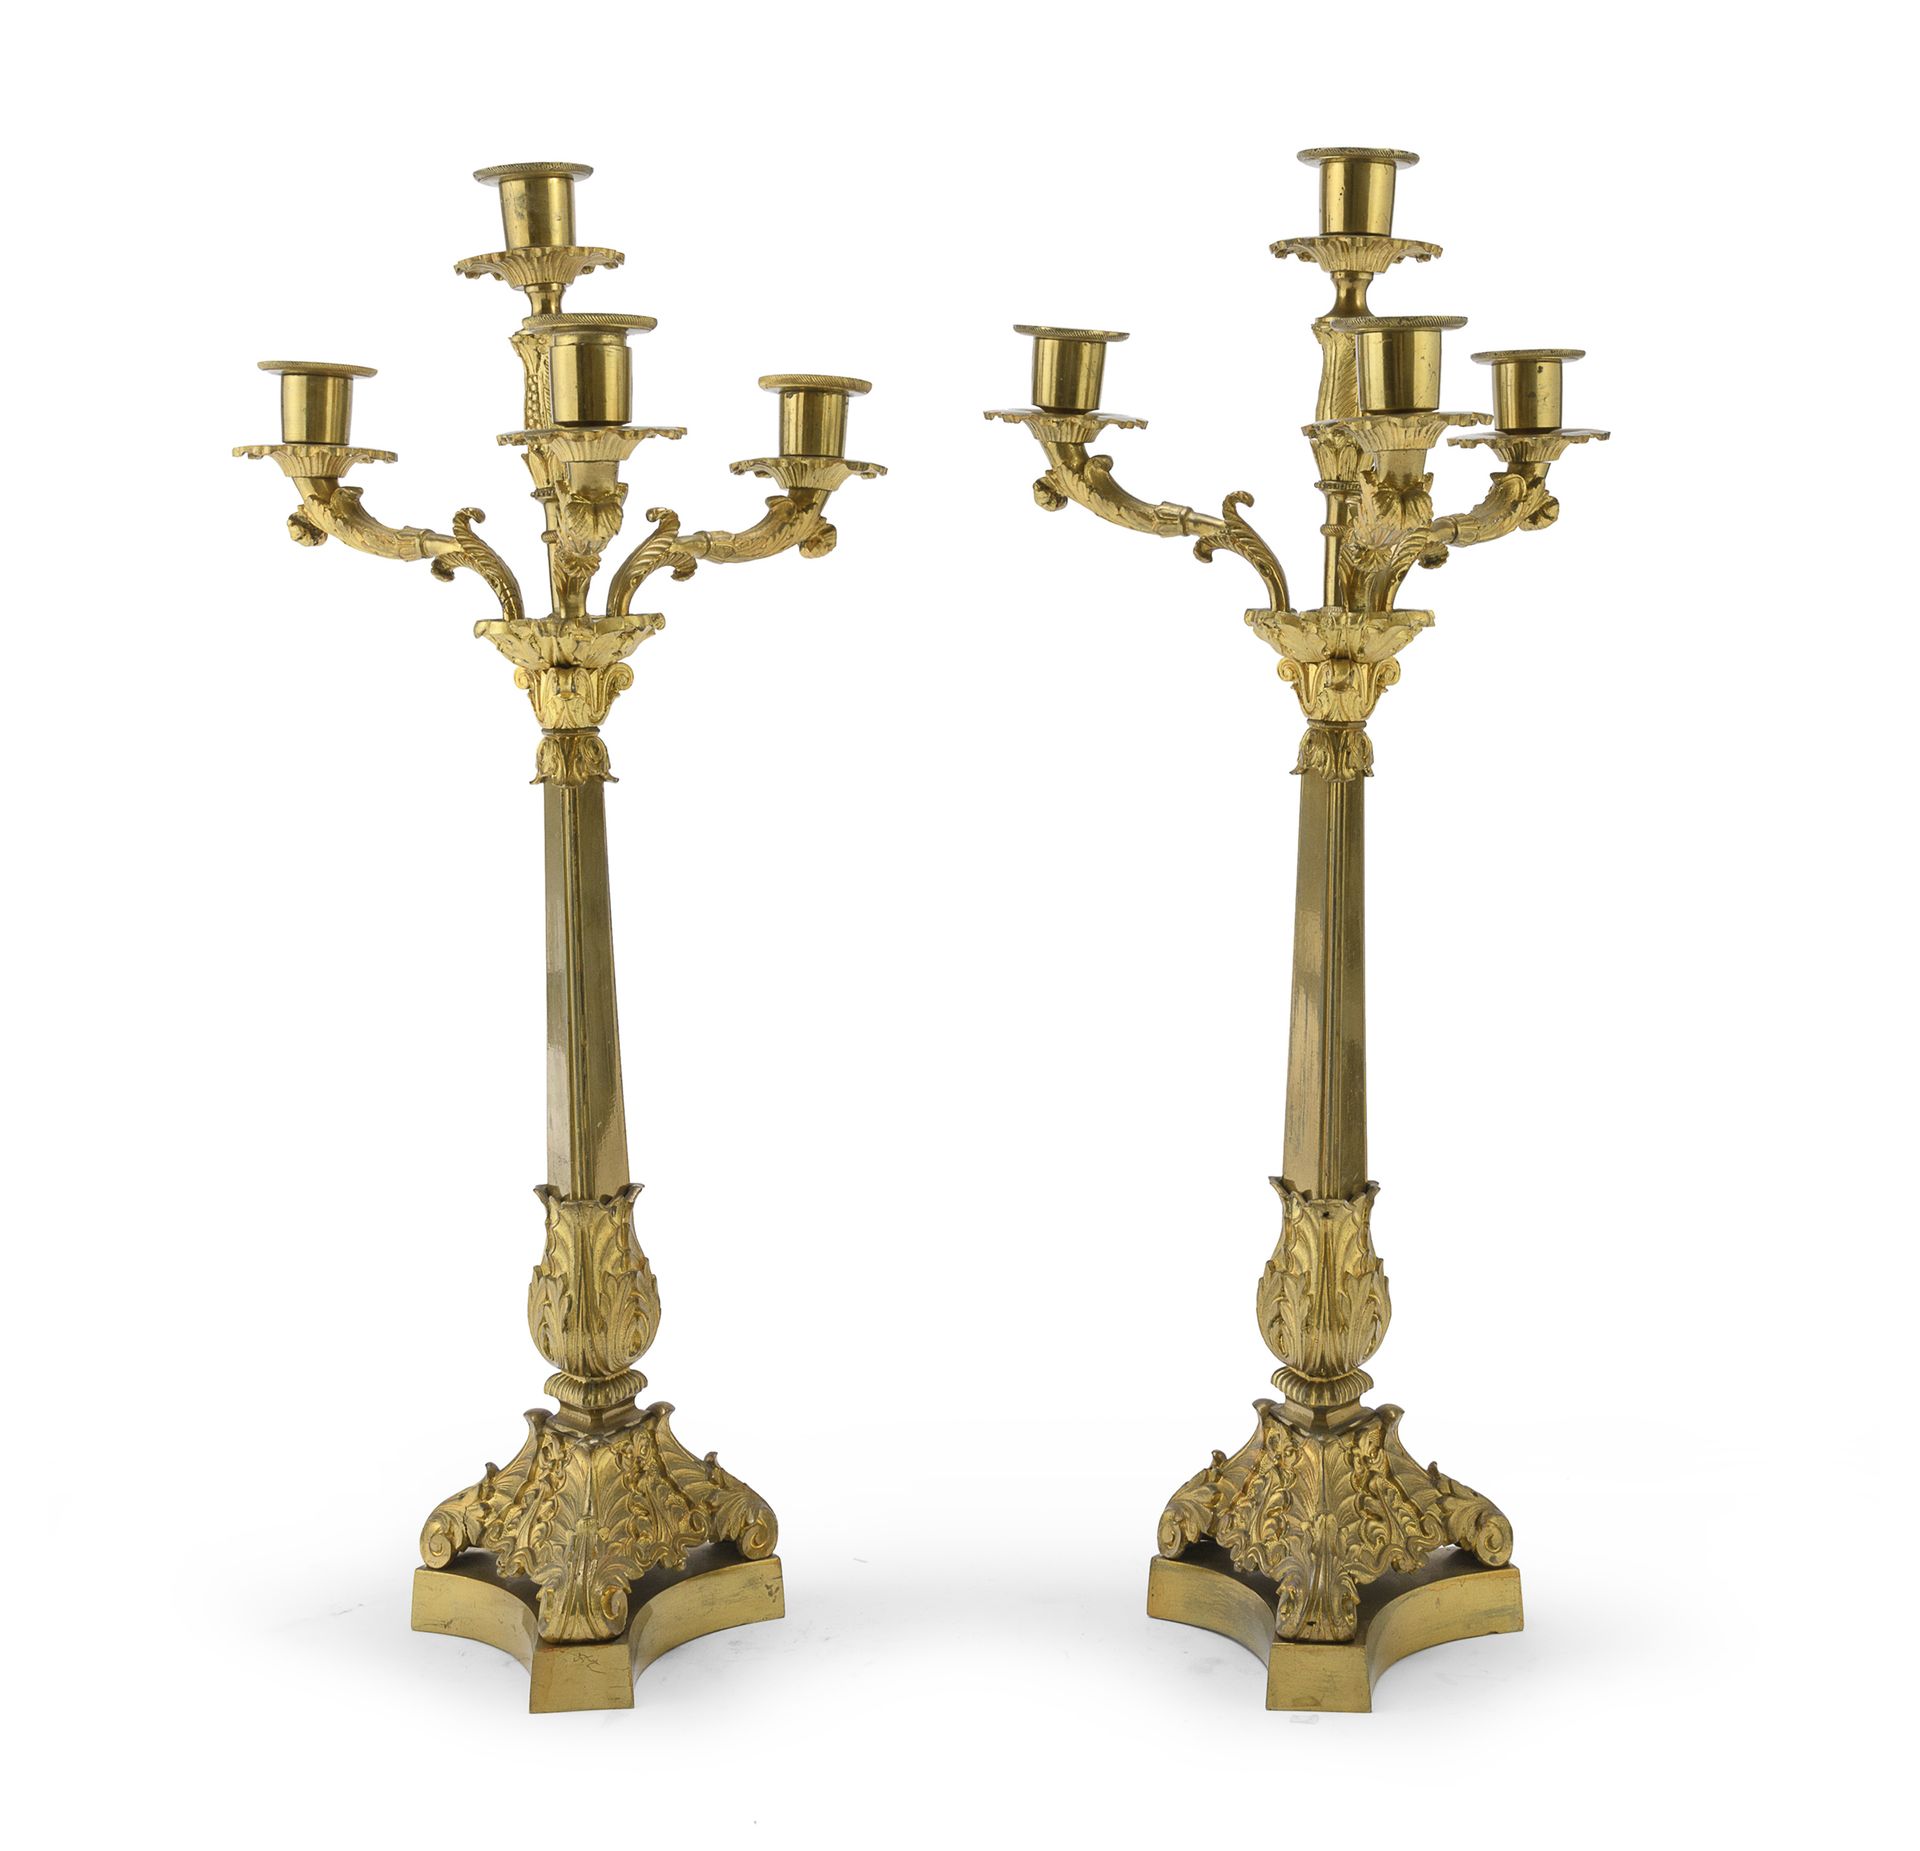 Null PAIR OF BRASS AND BRONZE CANDLESTICKS 19TH CENTURY